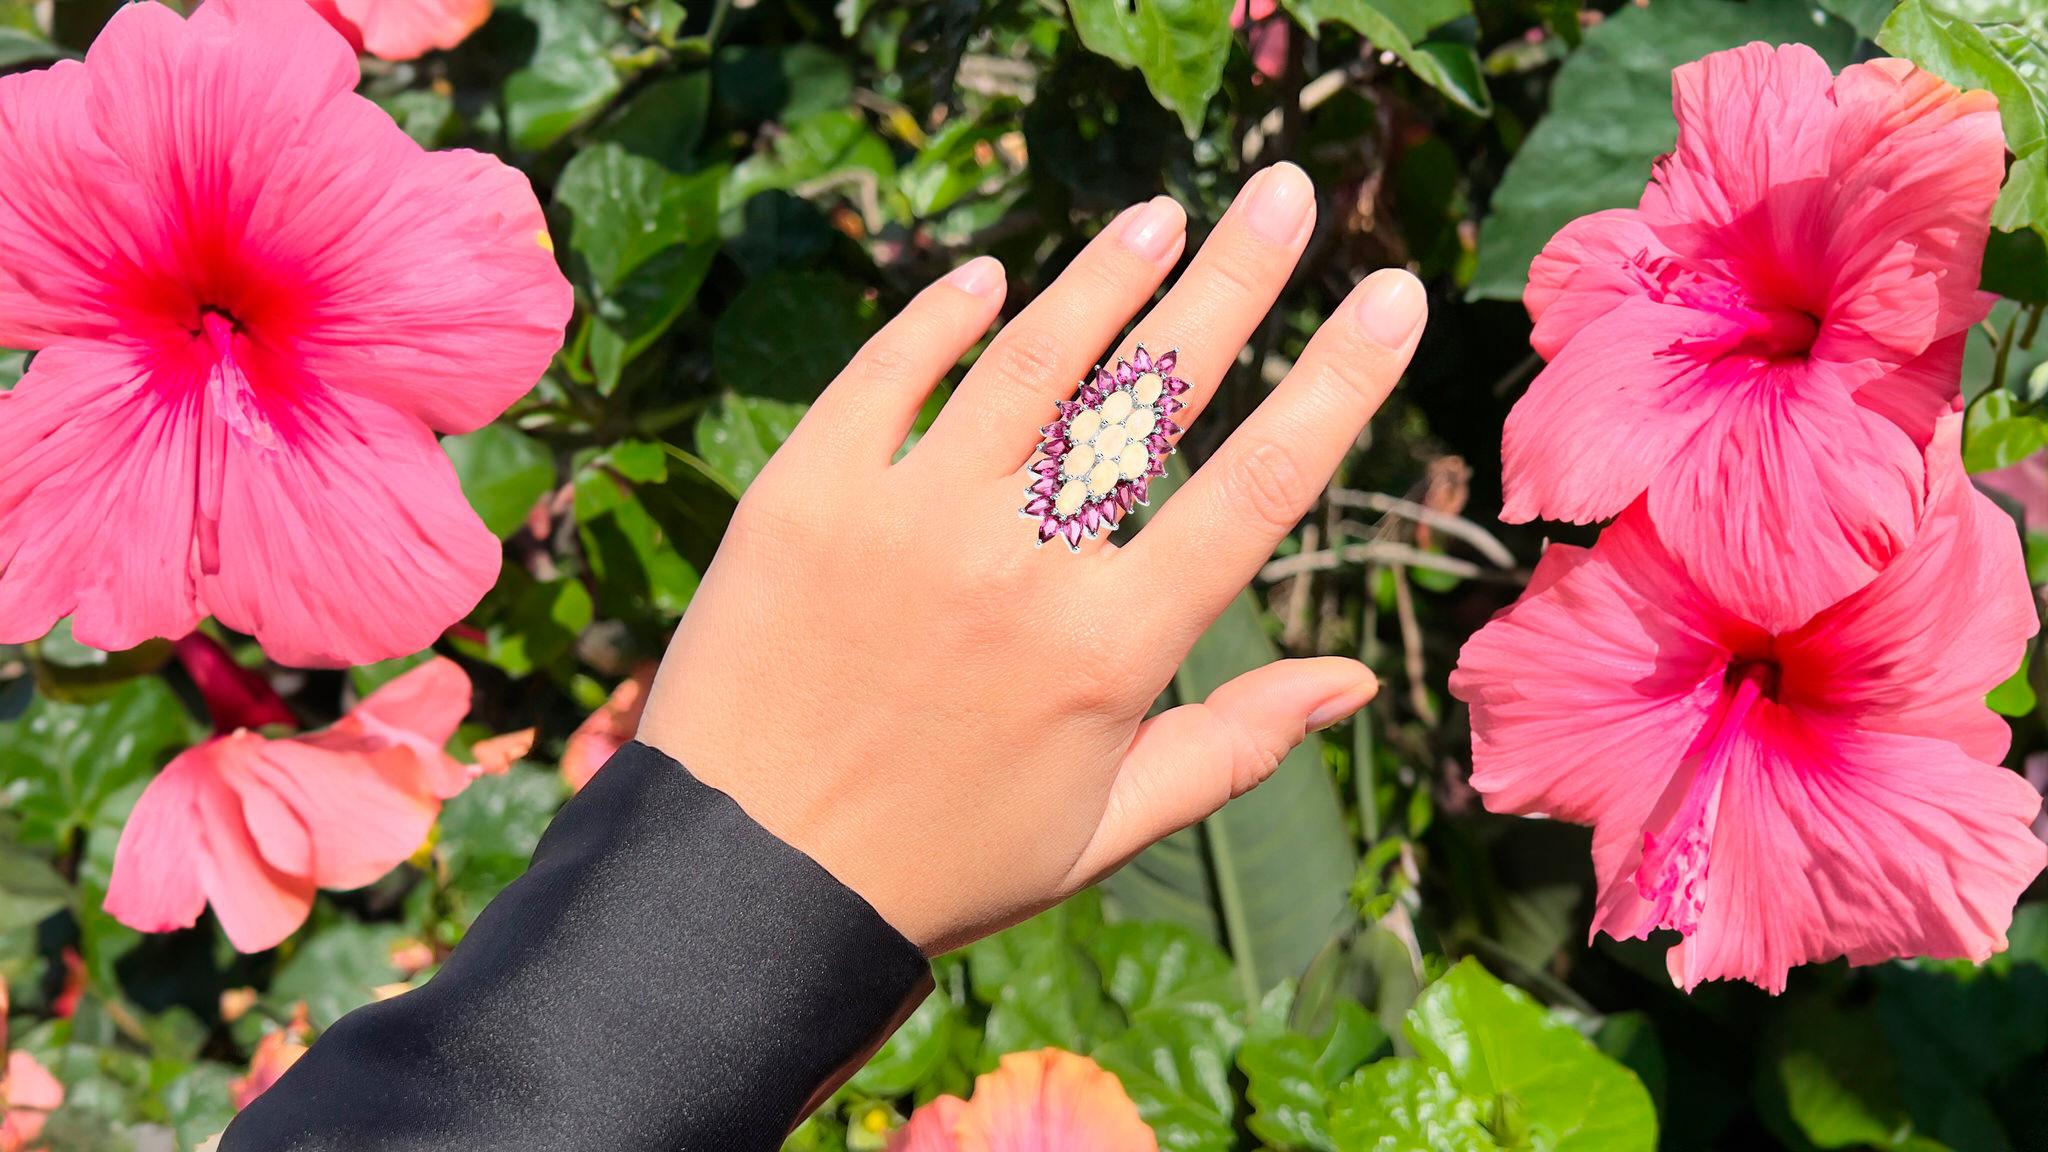 It comes with the Gemological Appraisal by GIA GG/AJP
All Gemstones are Natural
9 Opals = 2.45 Carats
22 Rhodolite Garnets = 5.95 Carats
Metal: Rhodium Plated Sterling Silver
Ring Size: 6* US
*It can be resized complimentary